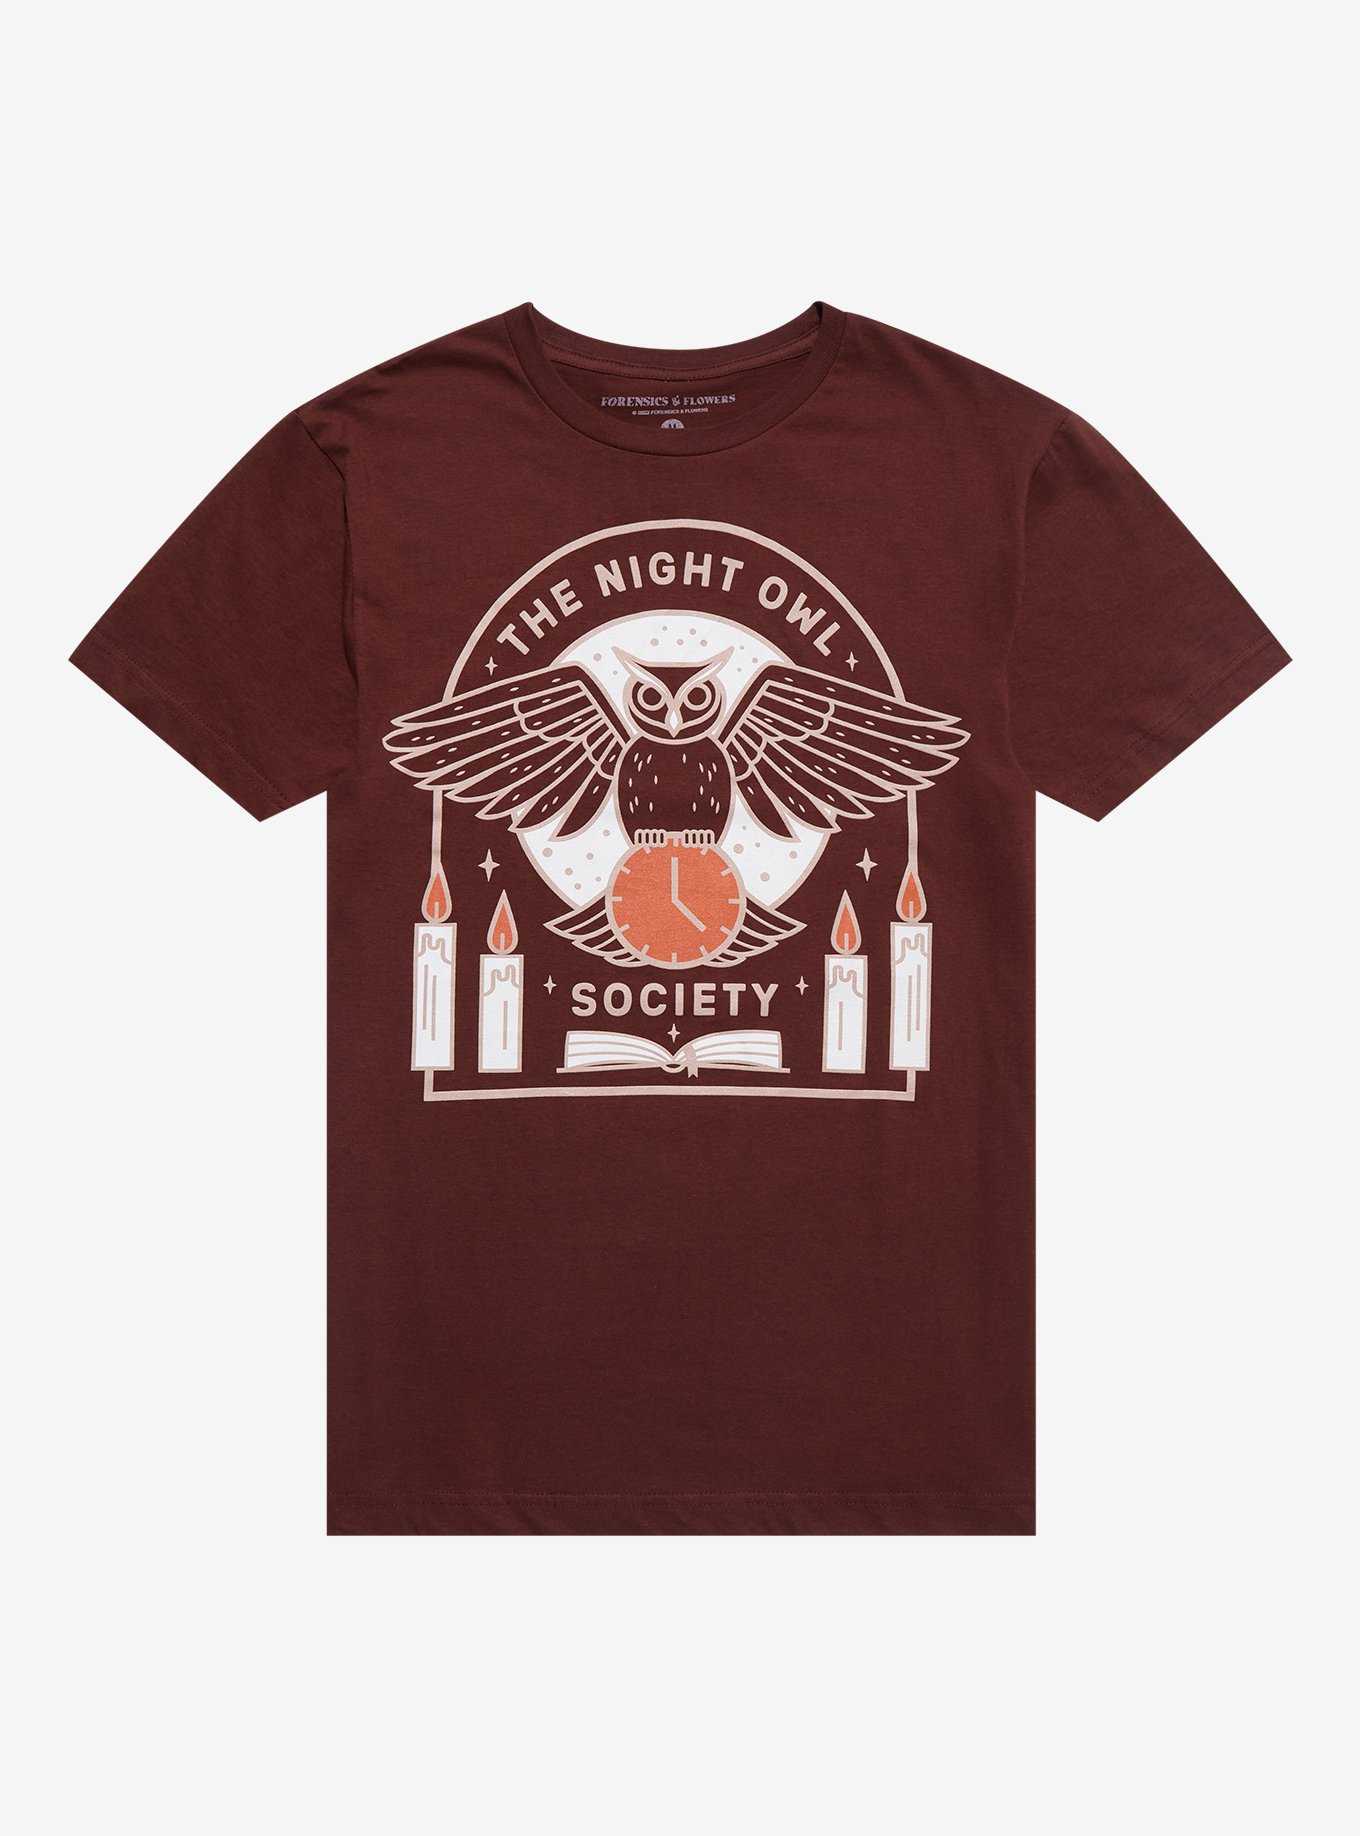 The Night Owl Society T-Shirt By Forensics & Flowers, , hi-res